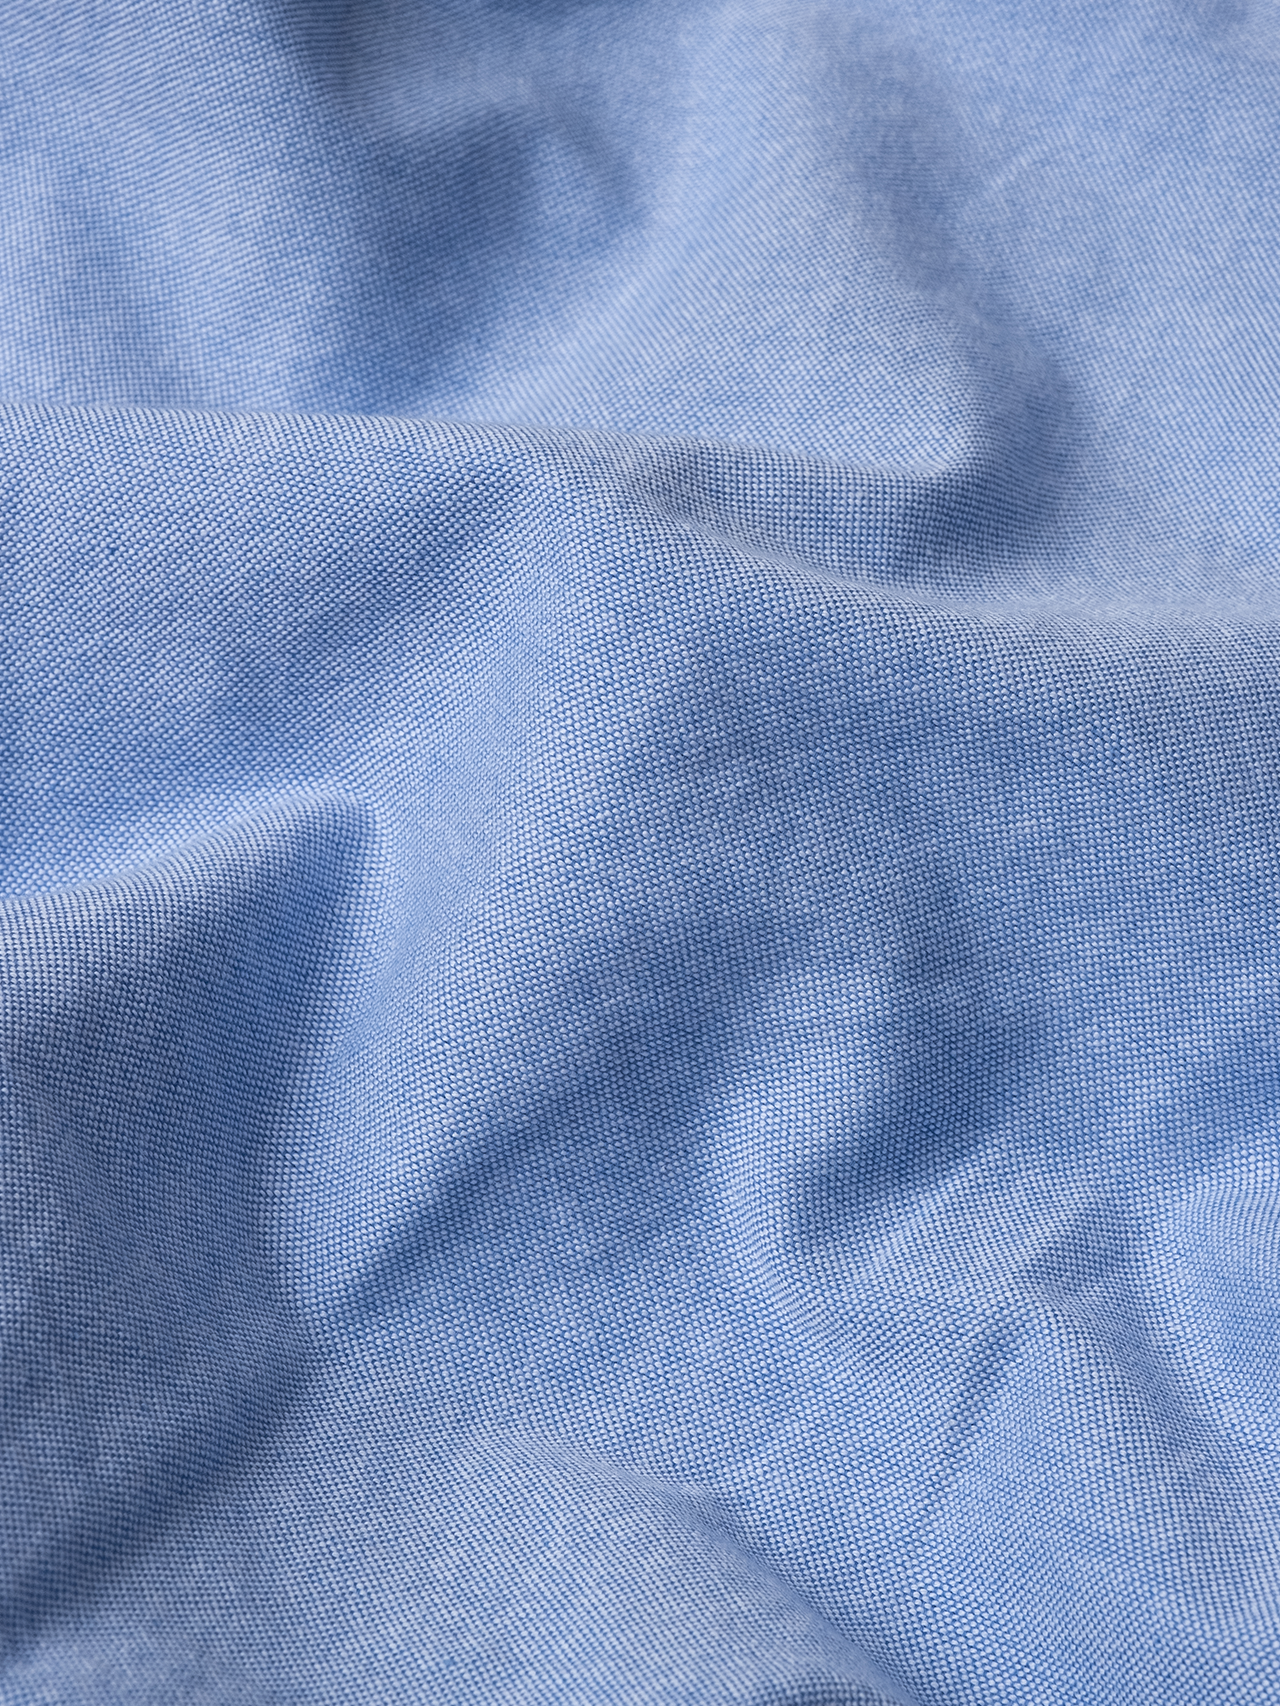 The fabric used to make a classic men's Oxford Shirt. This one is used to make the KESTIN Raeburn Button Down Shirt in a Light Blue colour.